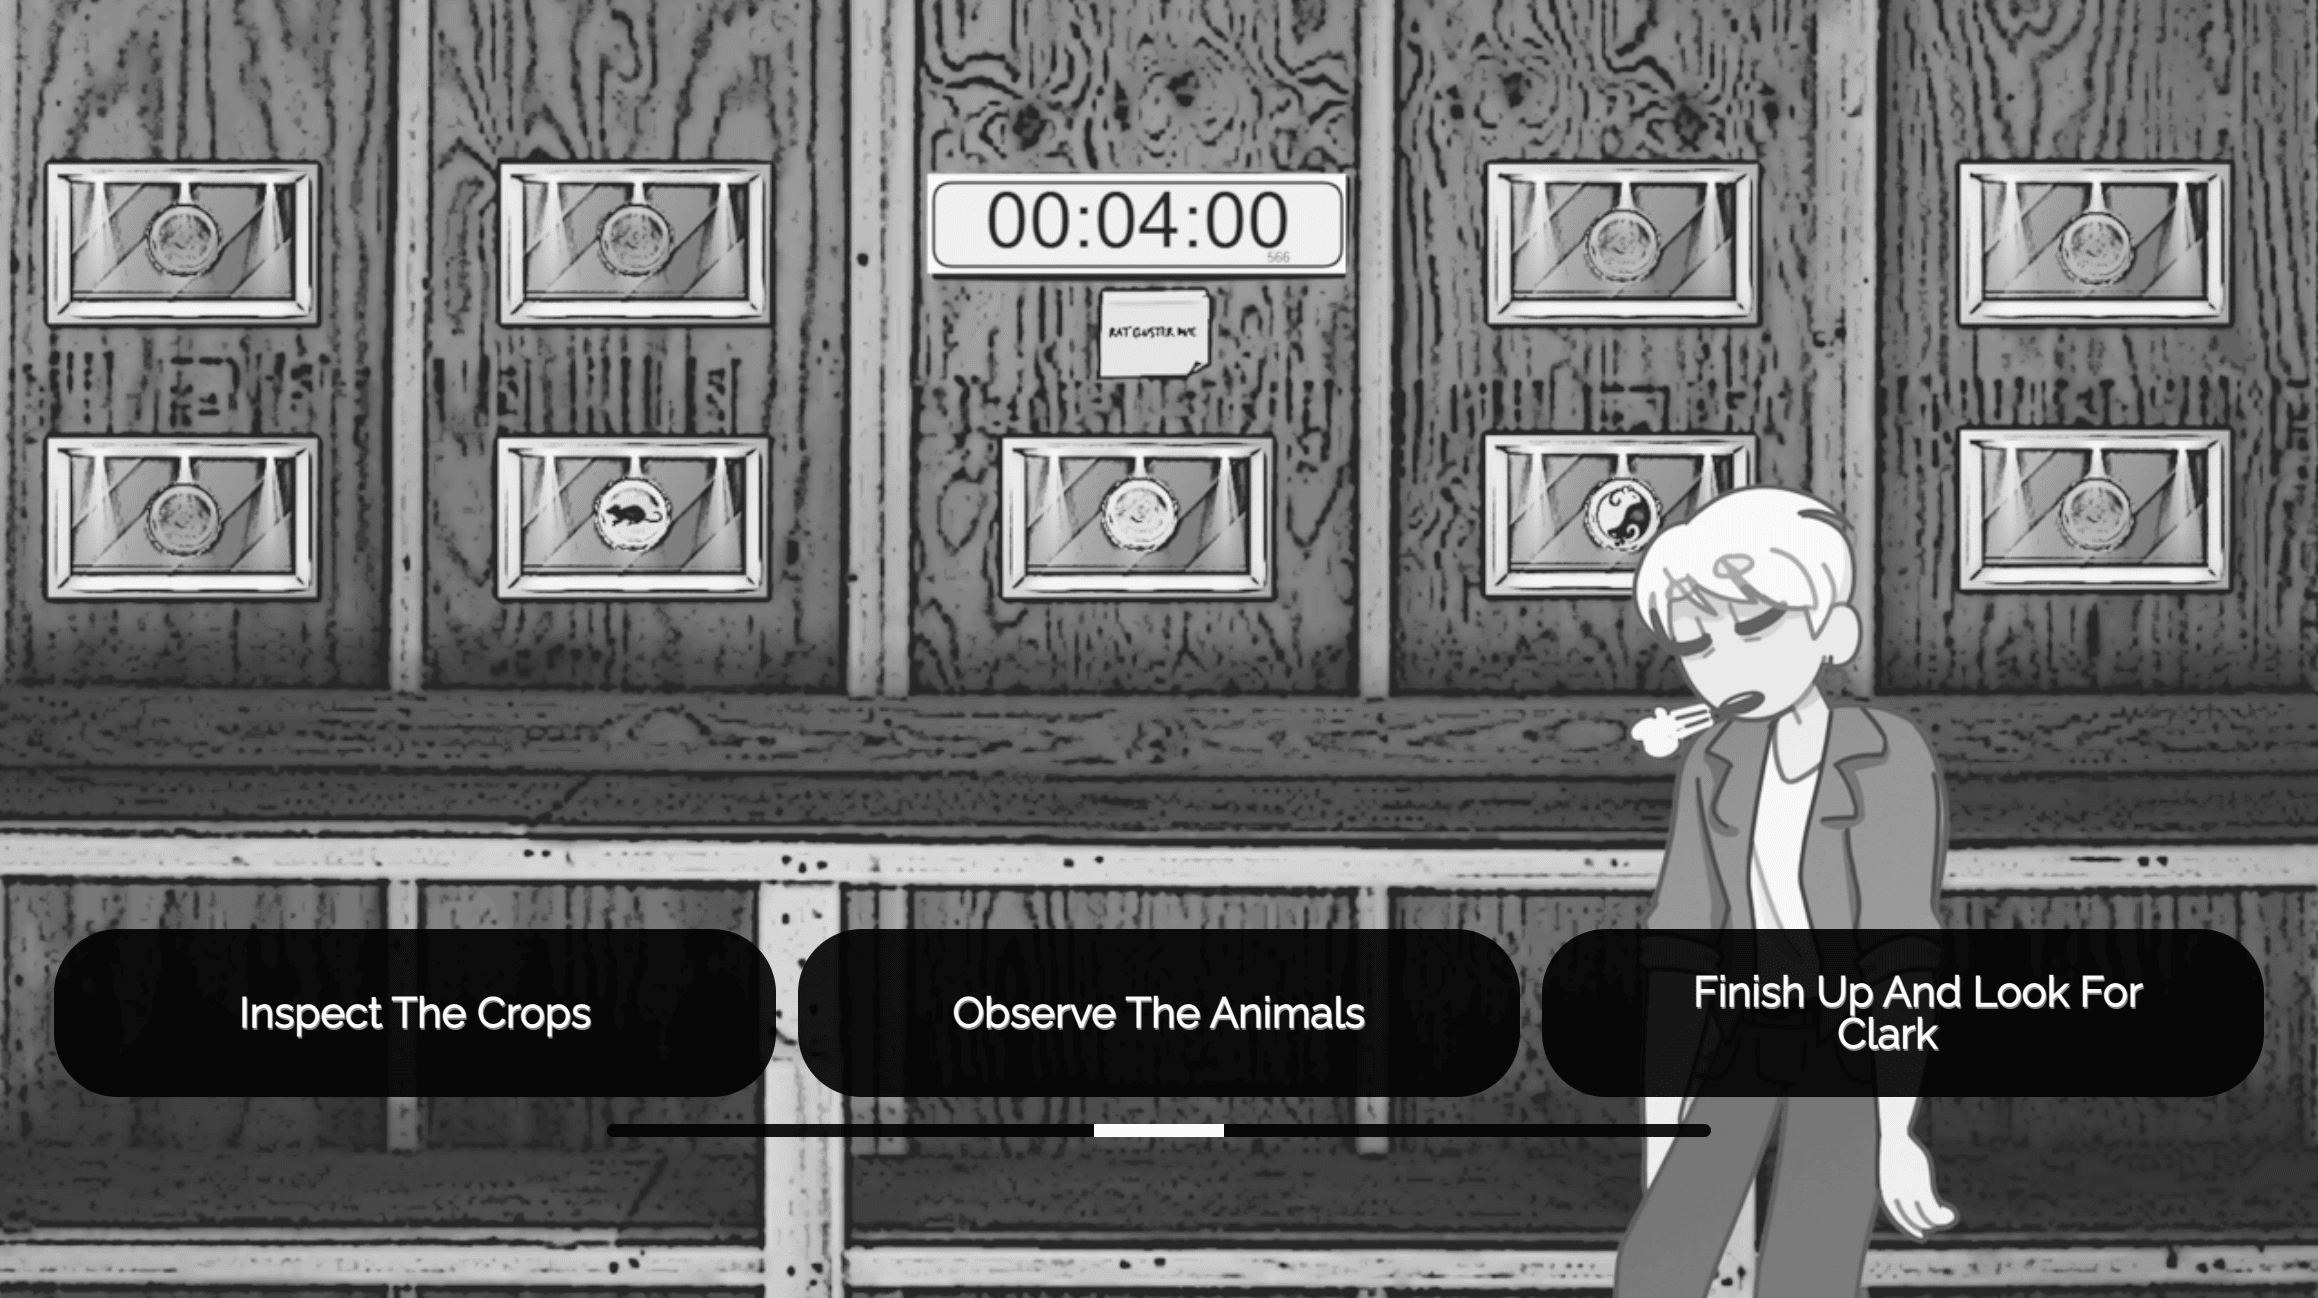 Crossroads - fully animated project from Austin Community College Students - a black and white animated scene. A man stands with 3 choices on screen "inspect the crops", "observe the animals", "Finish up and look for Clark"